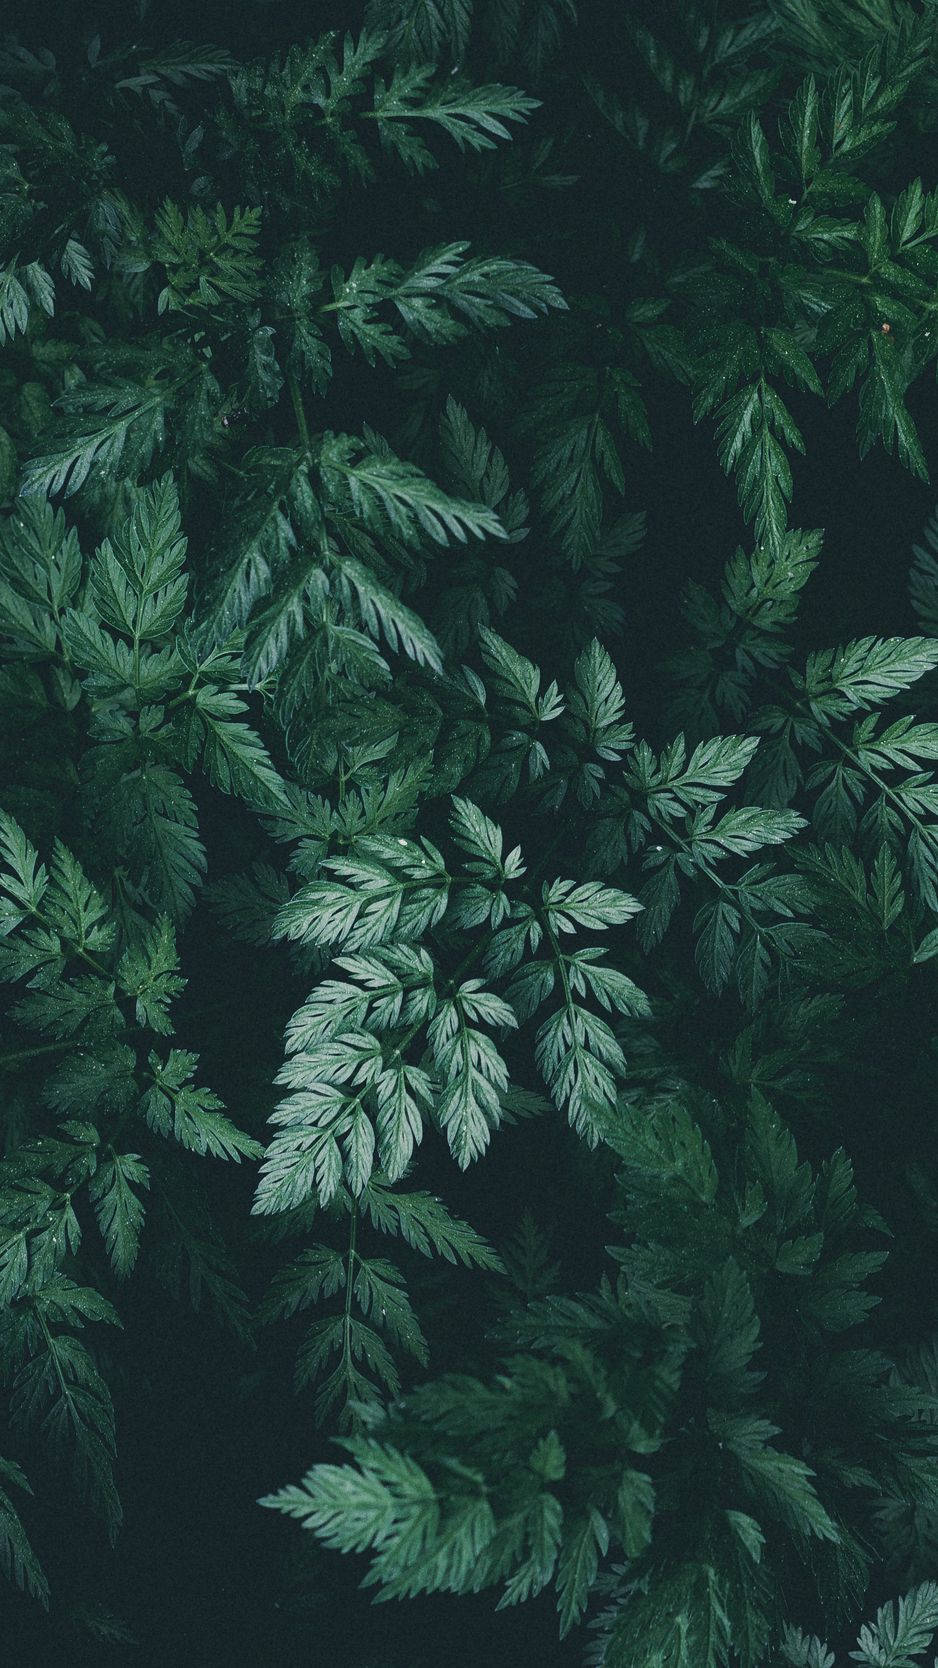 Show your unique style with this beautiful nature-inspired Plant Iphone wallpaper. Wallpaper